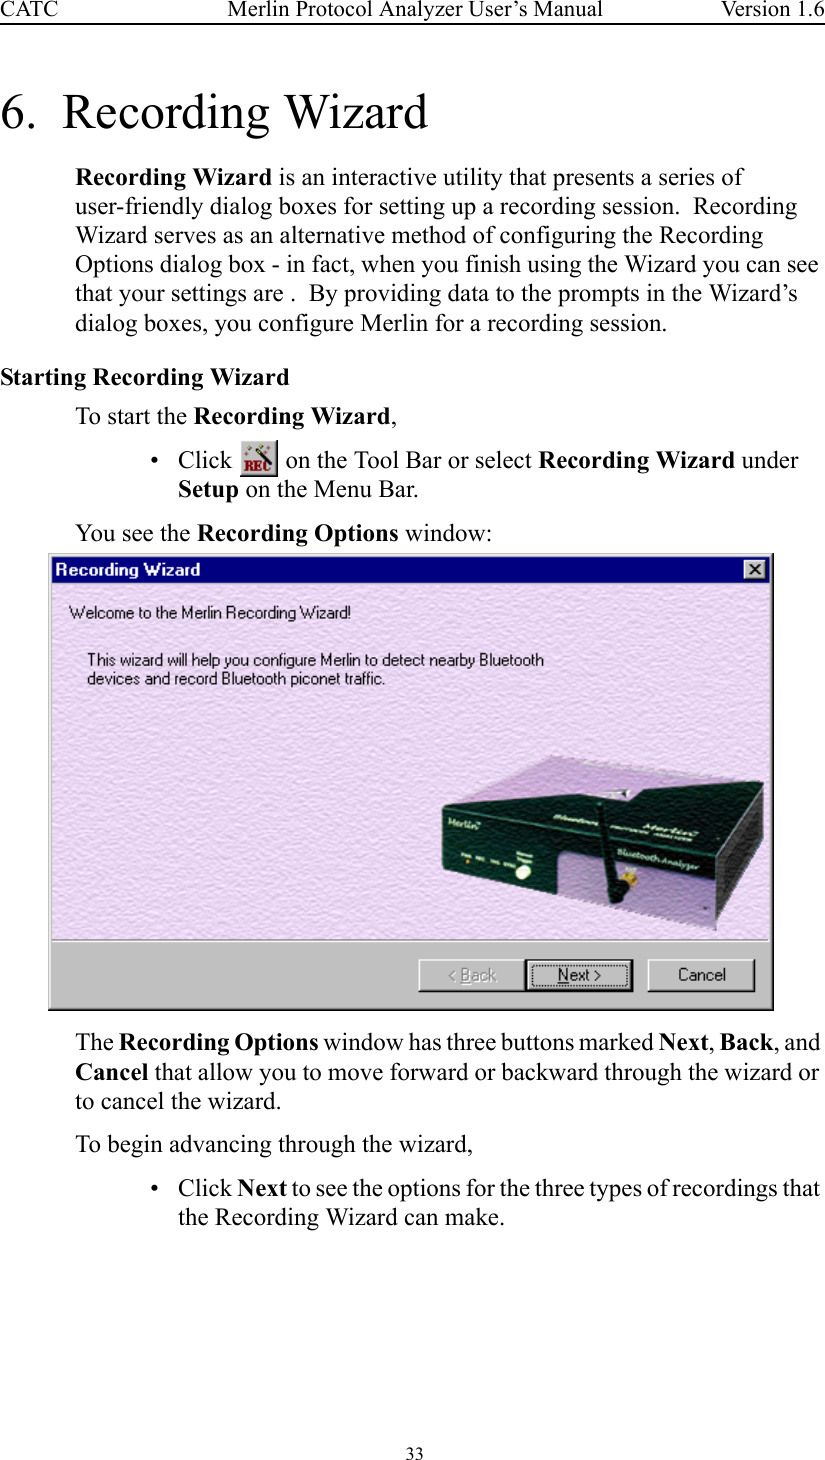  33 Merlin Protocol Analyzer User’s ManualCATC Version 1.66.  Recording WizardRecording Wizard is an interactive utility that presents a series of user-friendly dialog boxes for setting up a recording session.  Recording Wizard serves as an alternative method of configuring the Recording Options dialog box - in fact, when you finish using the Wizard you can see that your settings are .  By providing data to the prompts in the Wizard’s dialog boxes, you configure Merlin for a recording session.Starting Recording WizardTo start the Recording Wizard, • Click   on the Tool Bar or select Recording Wizard under Setup on the Menu Bar.You see the Recording Options window:The Recording Options window has three buttons marked Next, Back, and Cancel that allow you to move forward or backward through the wizard or to cancel the wizard.To begin advancing through the wizard,•Click Next to see the options for the three types of recordings that the Recording Wizard can make.